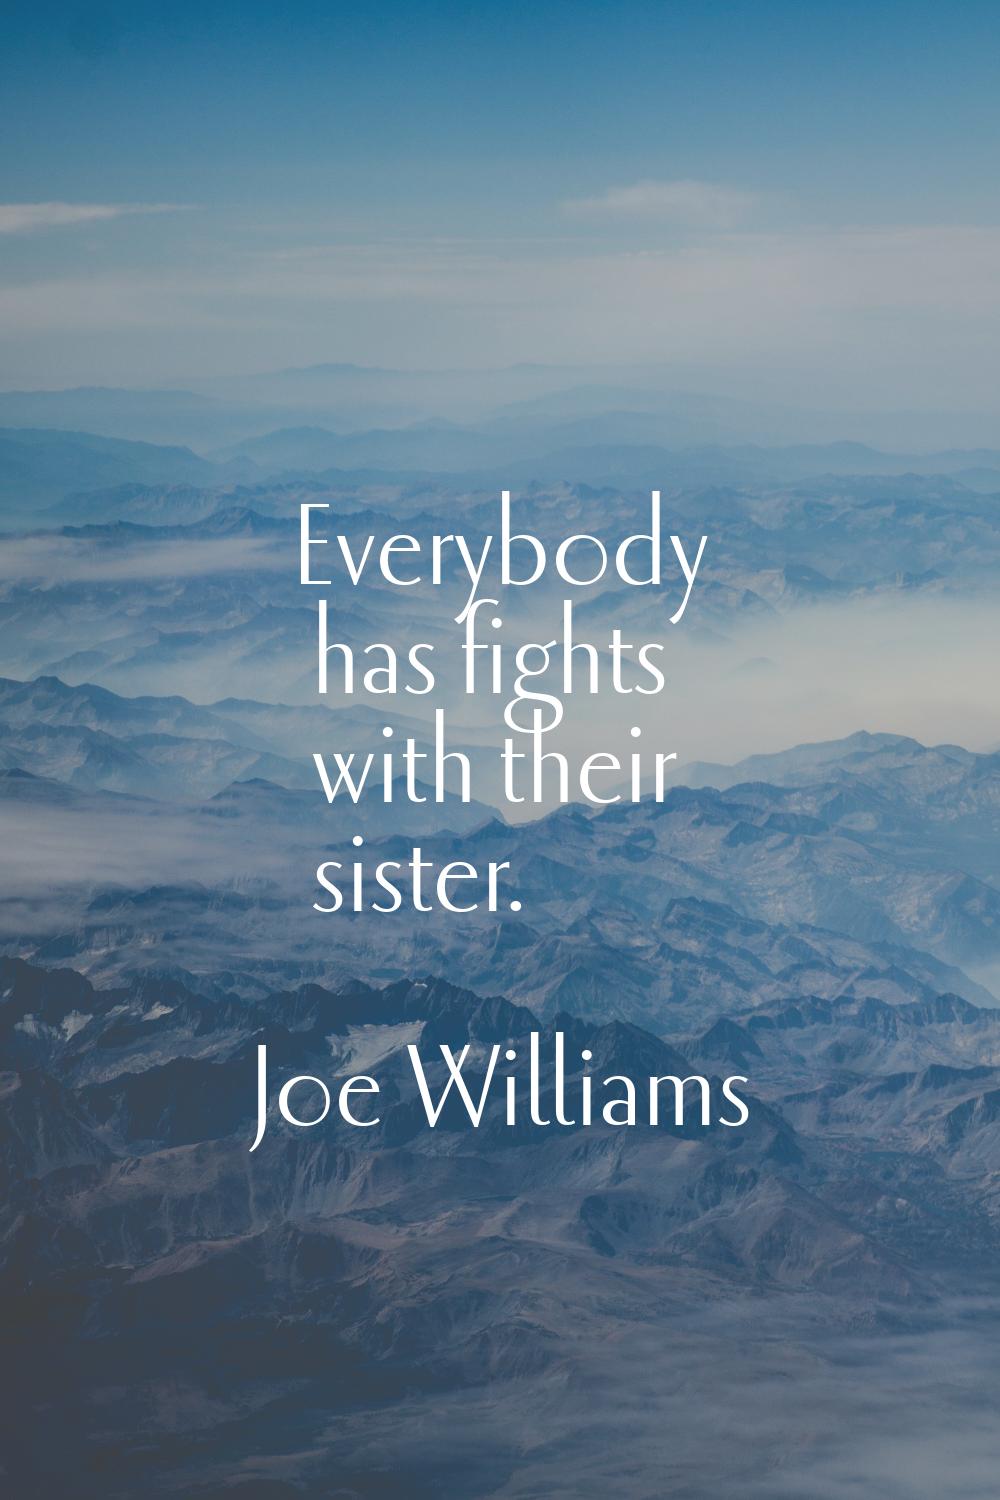 Everybody has fights with their sister.